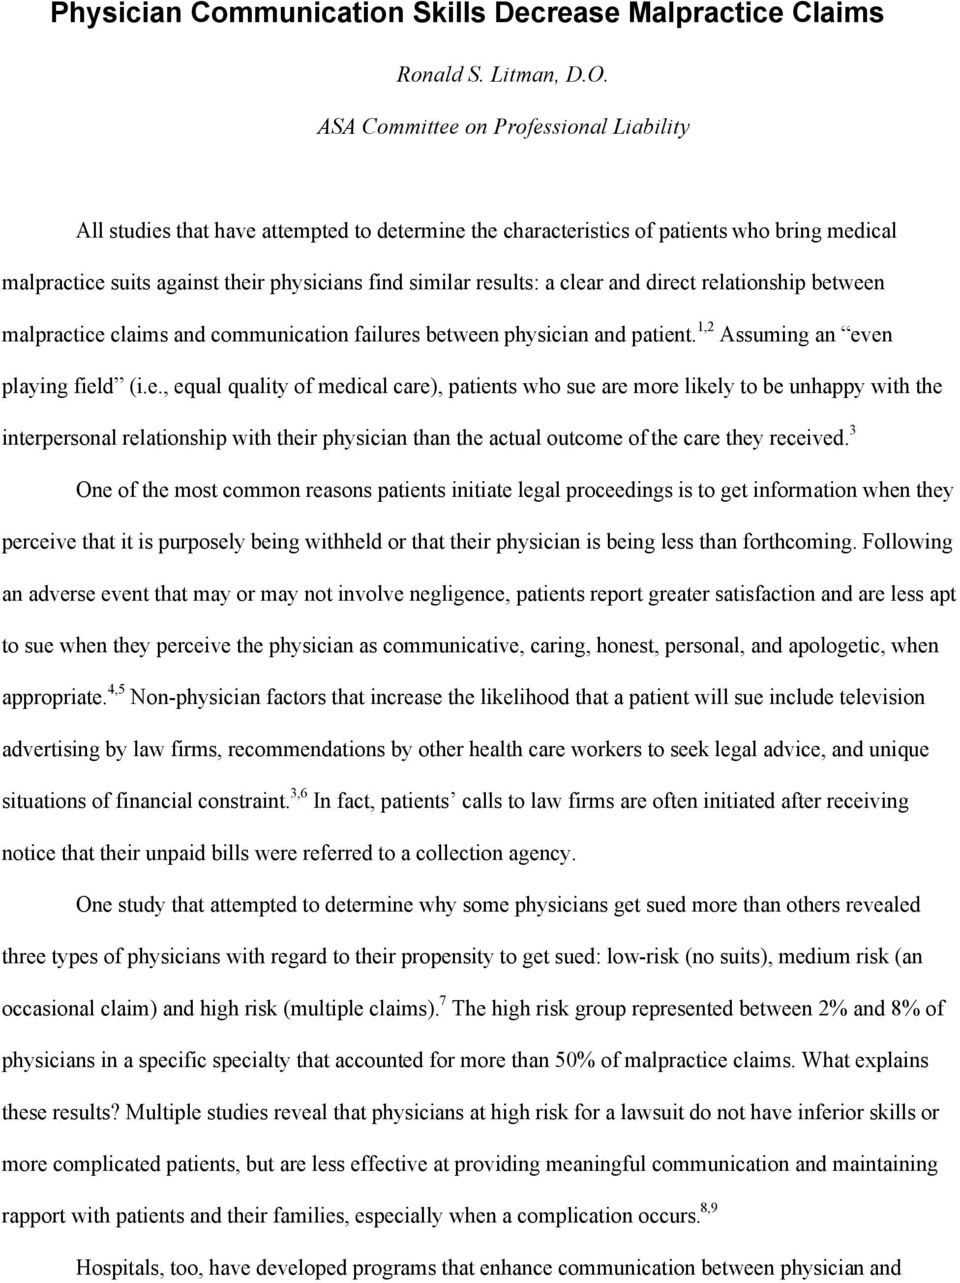 a clear and direct relationship between malpractice claims and communication failures between physician and patient. 1,2 Assuming an even playing field (i.e., equal quality of medical care), patients who sue are more likely to be unhappy with the interpersonal relationship with their physician than the actual outcome of the care they received.